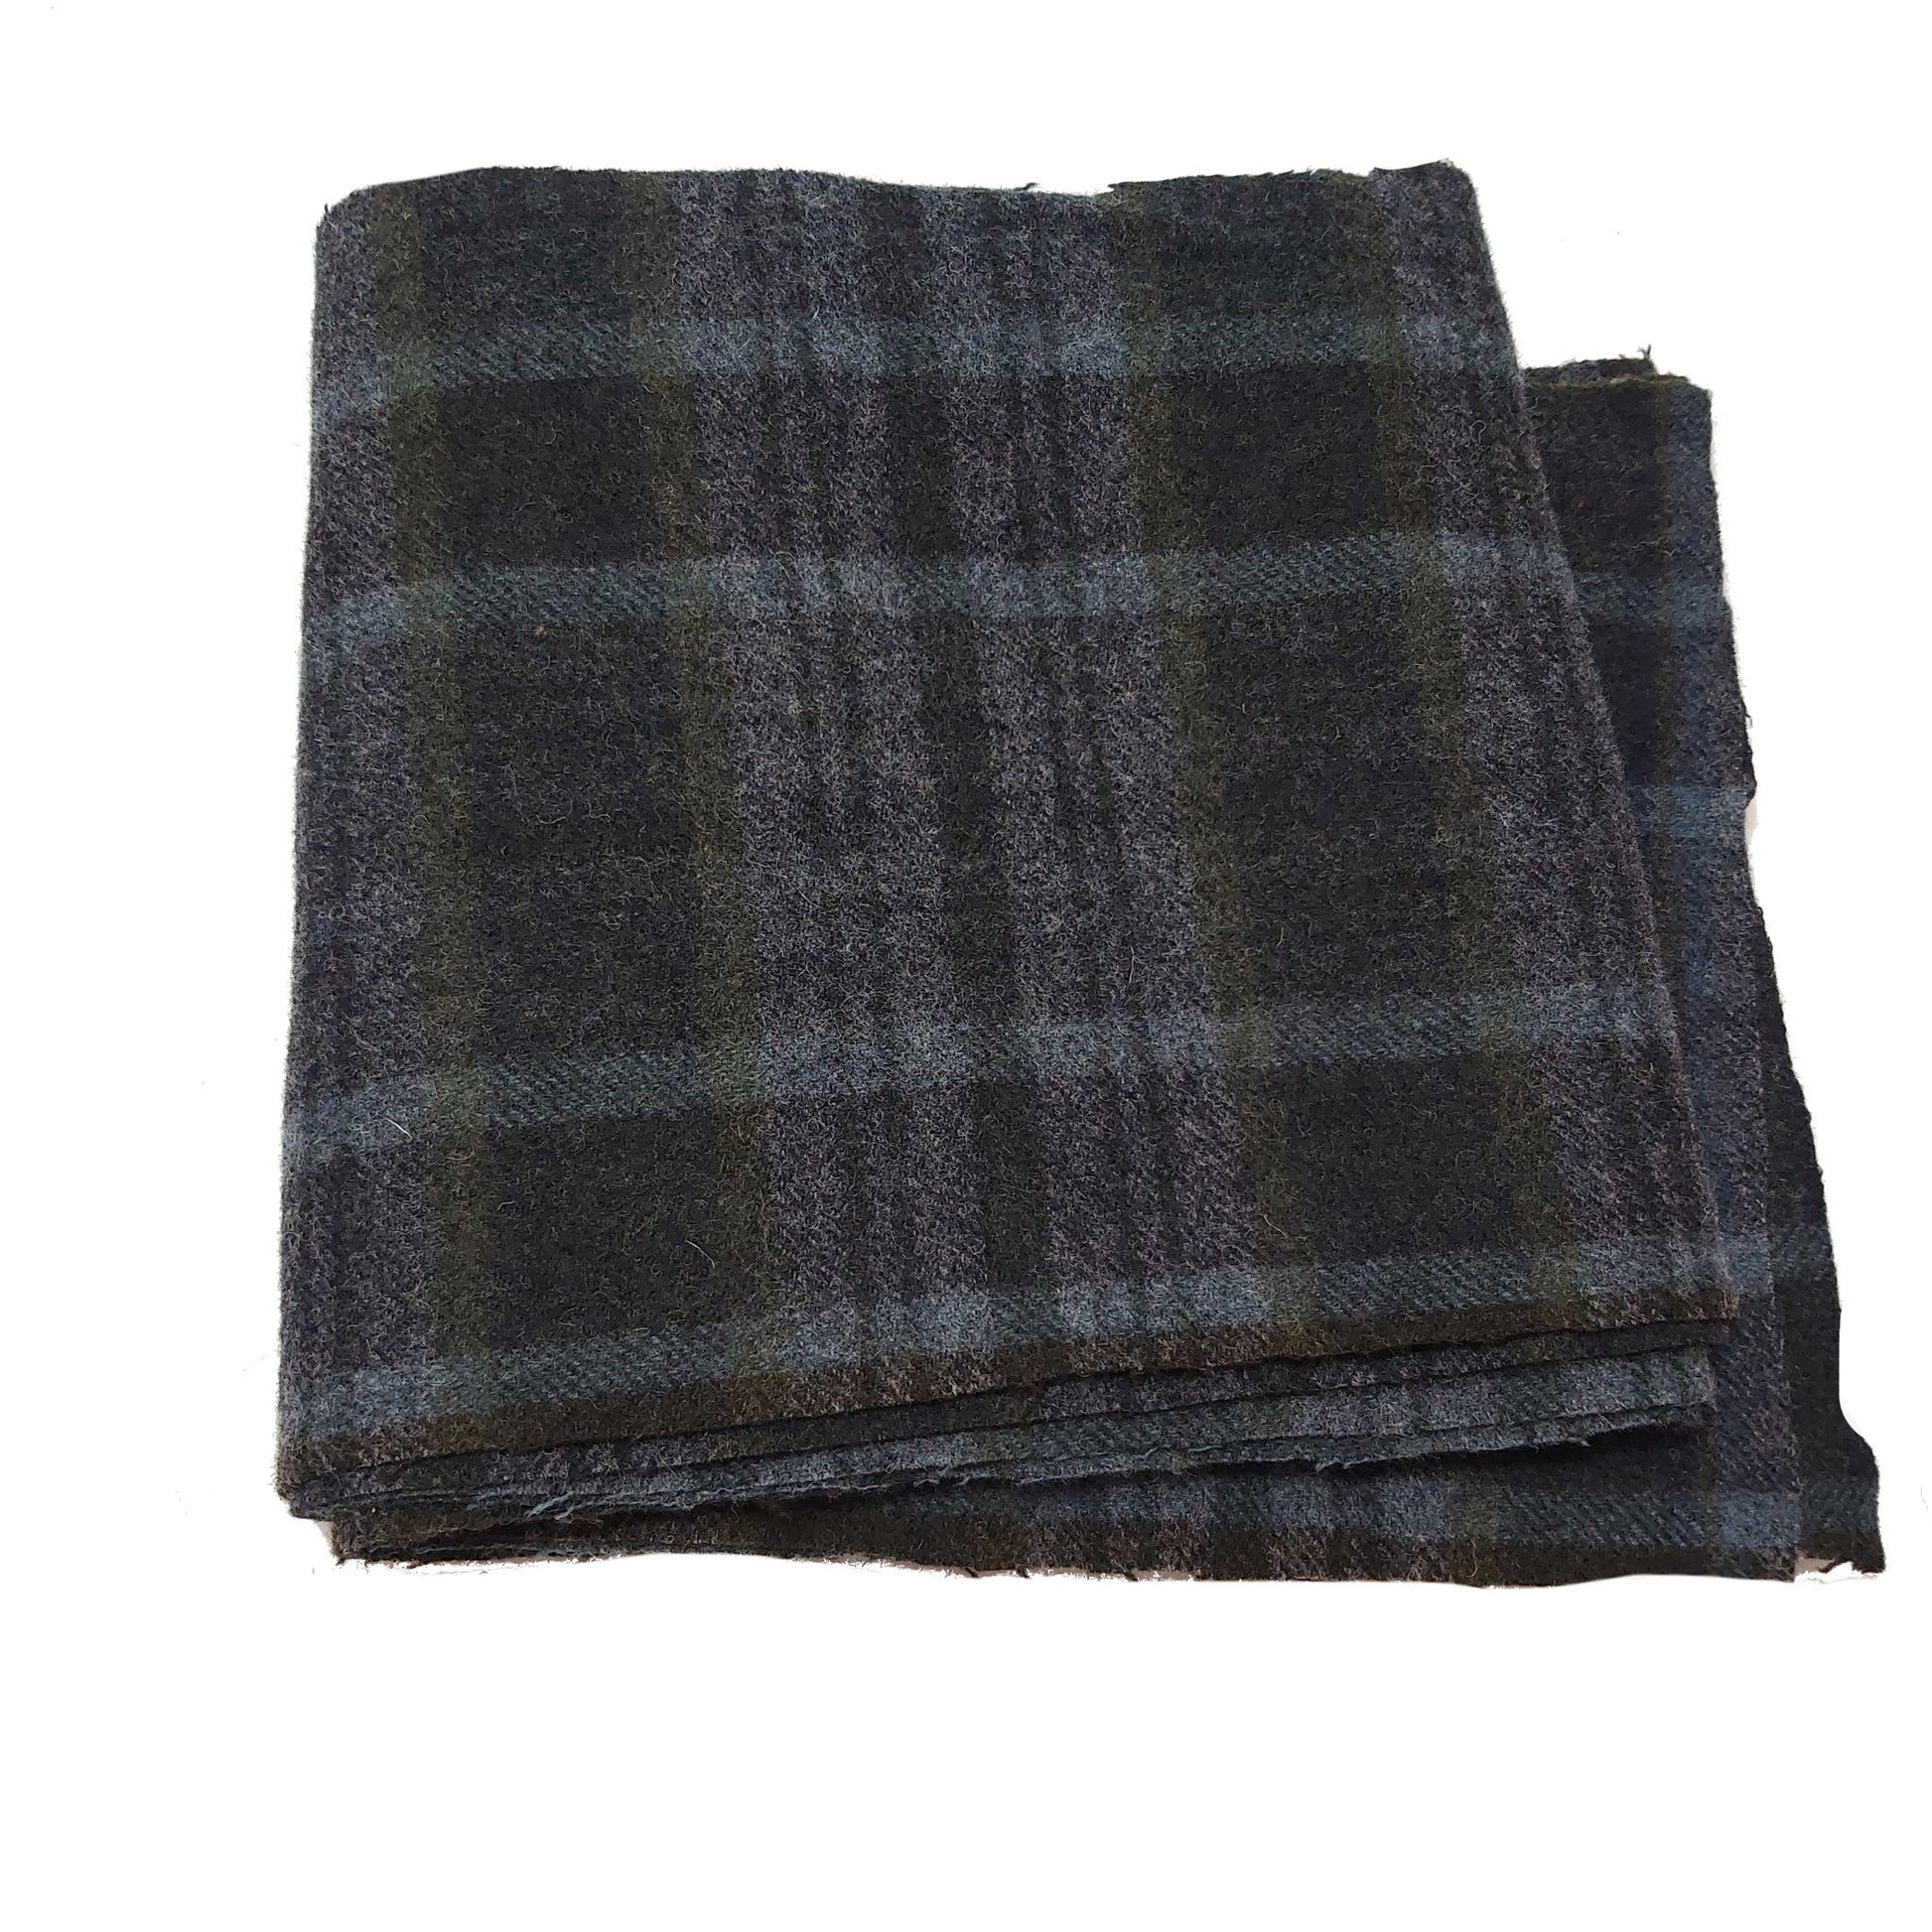 Tweed Fabric - Grey/Olive/Brown Check 25cm wide Super Heavy 135